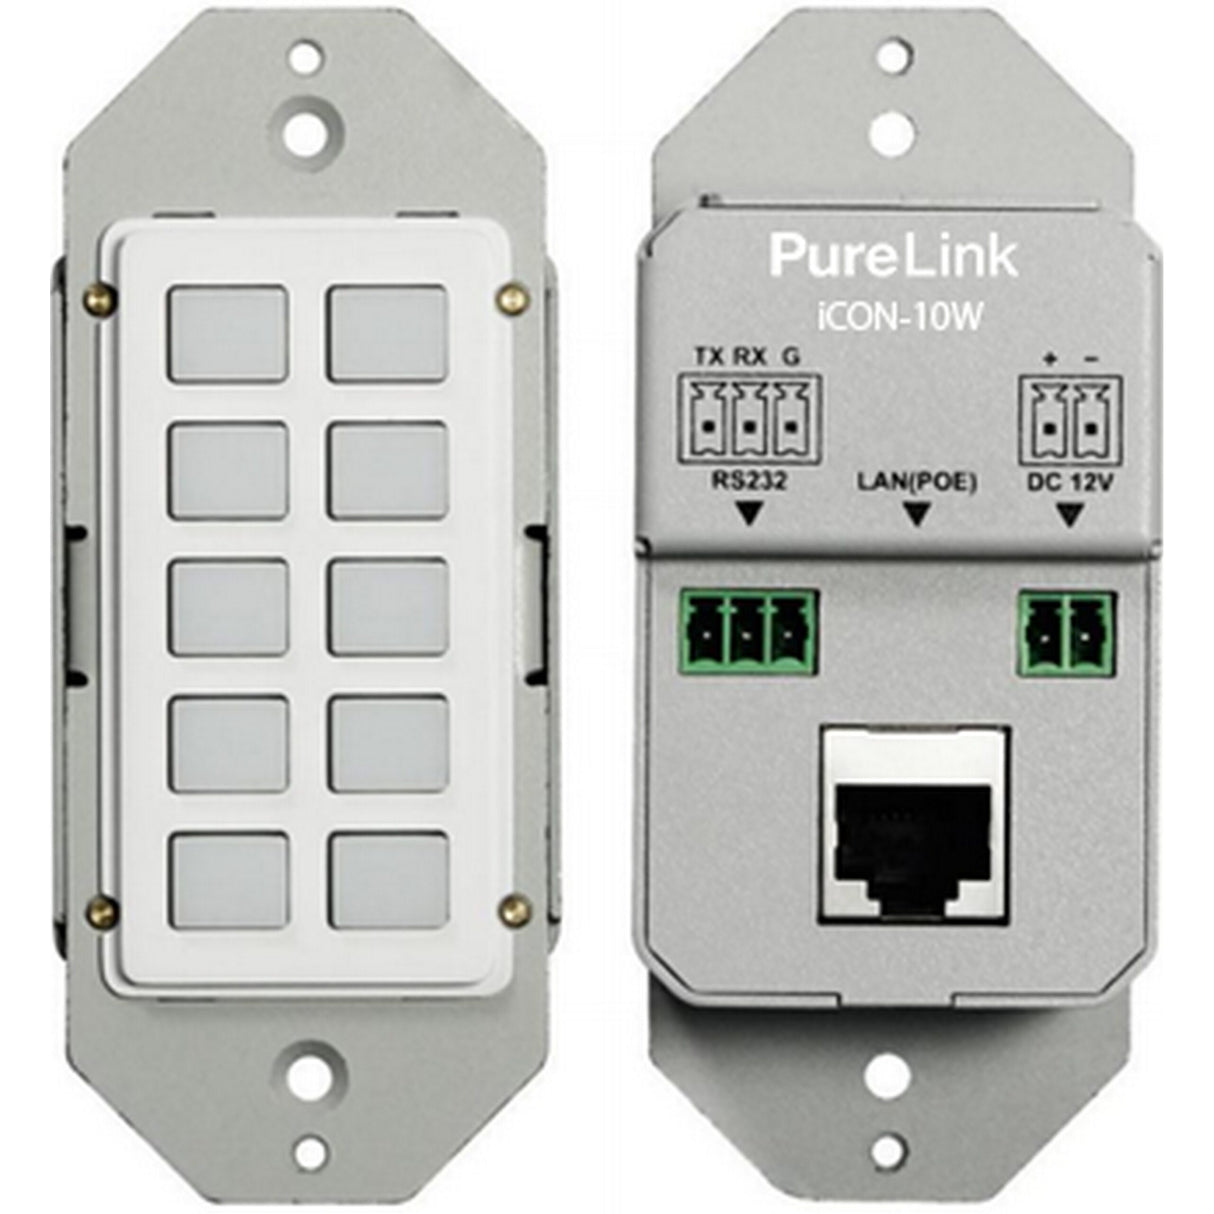 PureLink iCON-10W iCON 10W 10 Button Programmable LAN/RS232 Controller